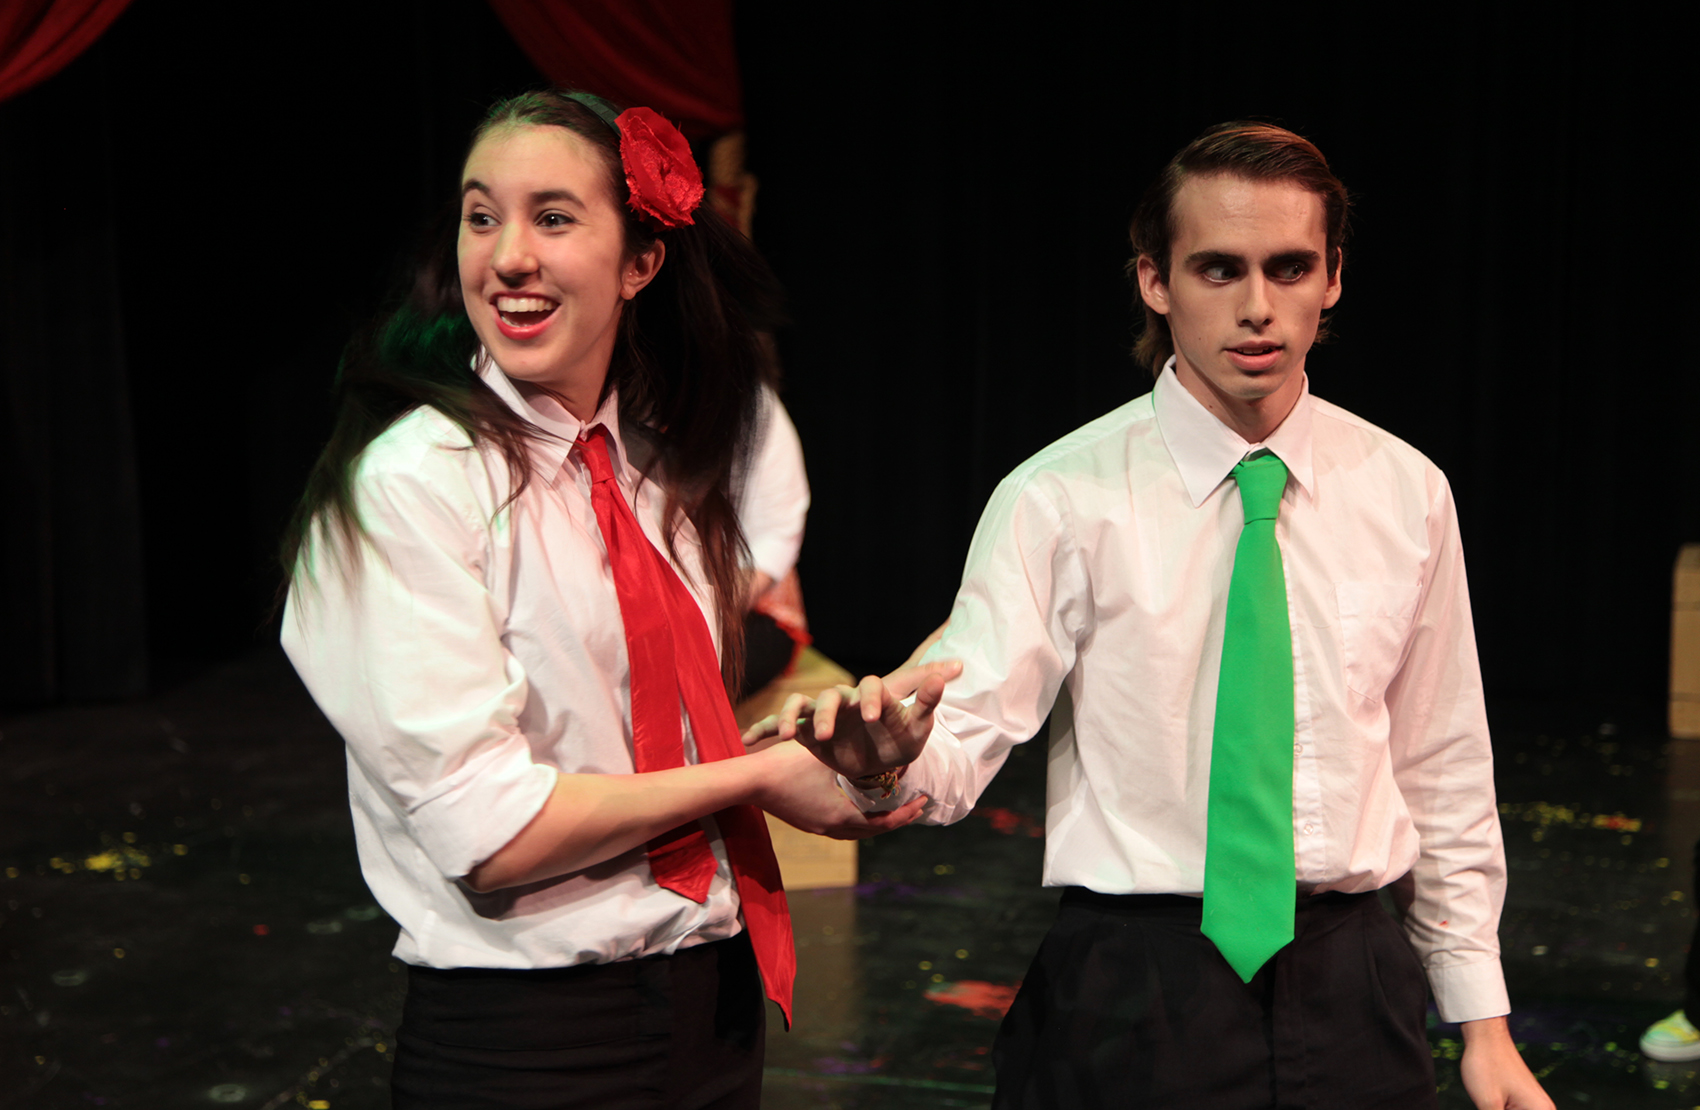 This is a close shot of a young man and woman standing together, the woman in a red tie, holding onto the arm of the man (who wears a green tie). She looks to the left excitedly, the young man looks to the right hurriedly, anxious and seemingly tense.  